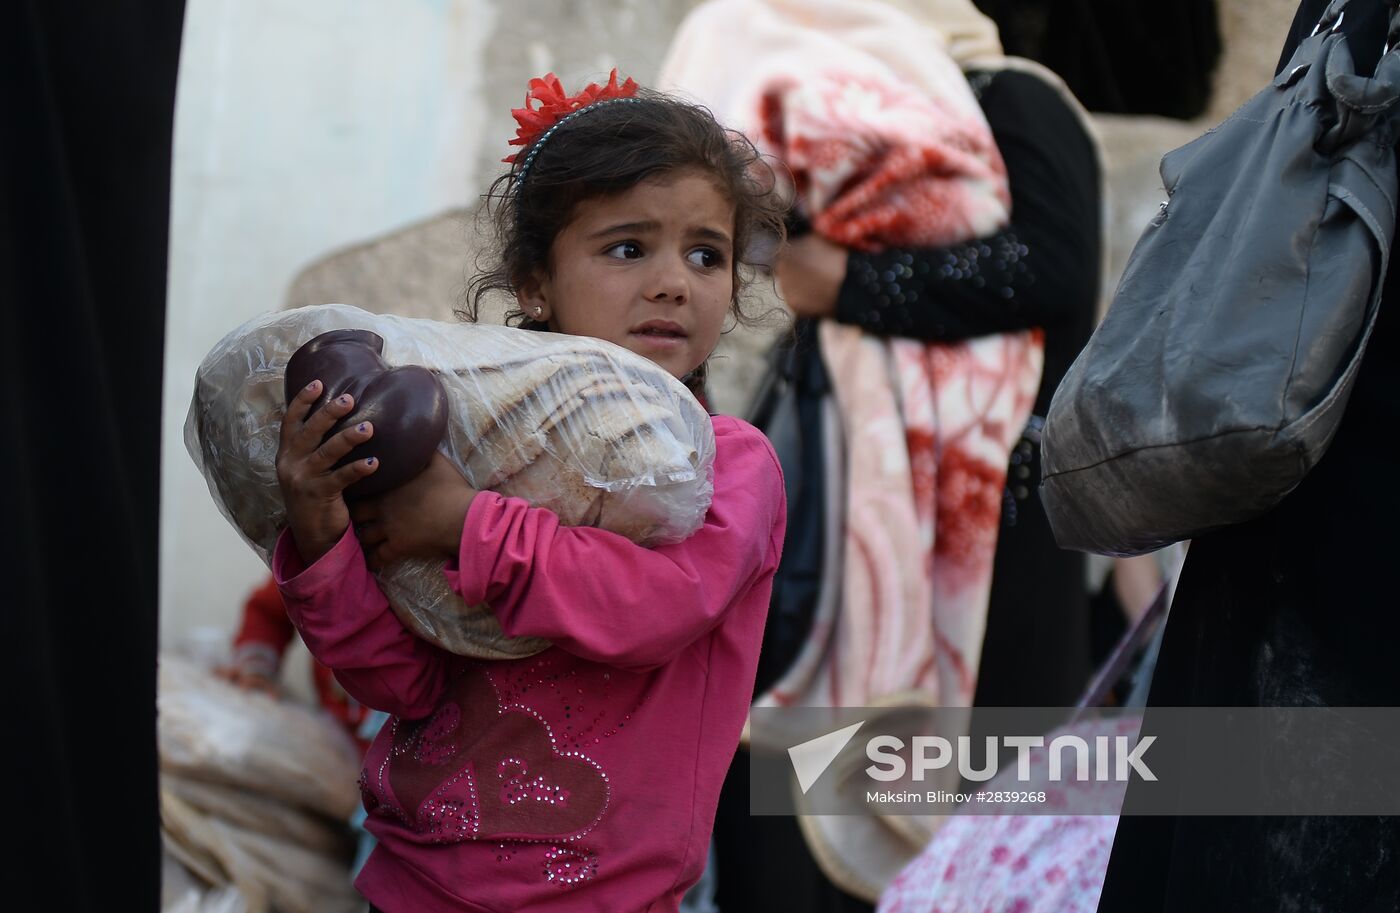 Handing out Russian humanitarian relief aid to the Syrian population